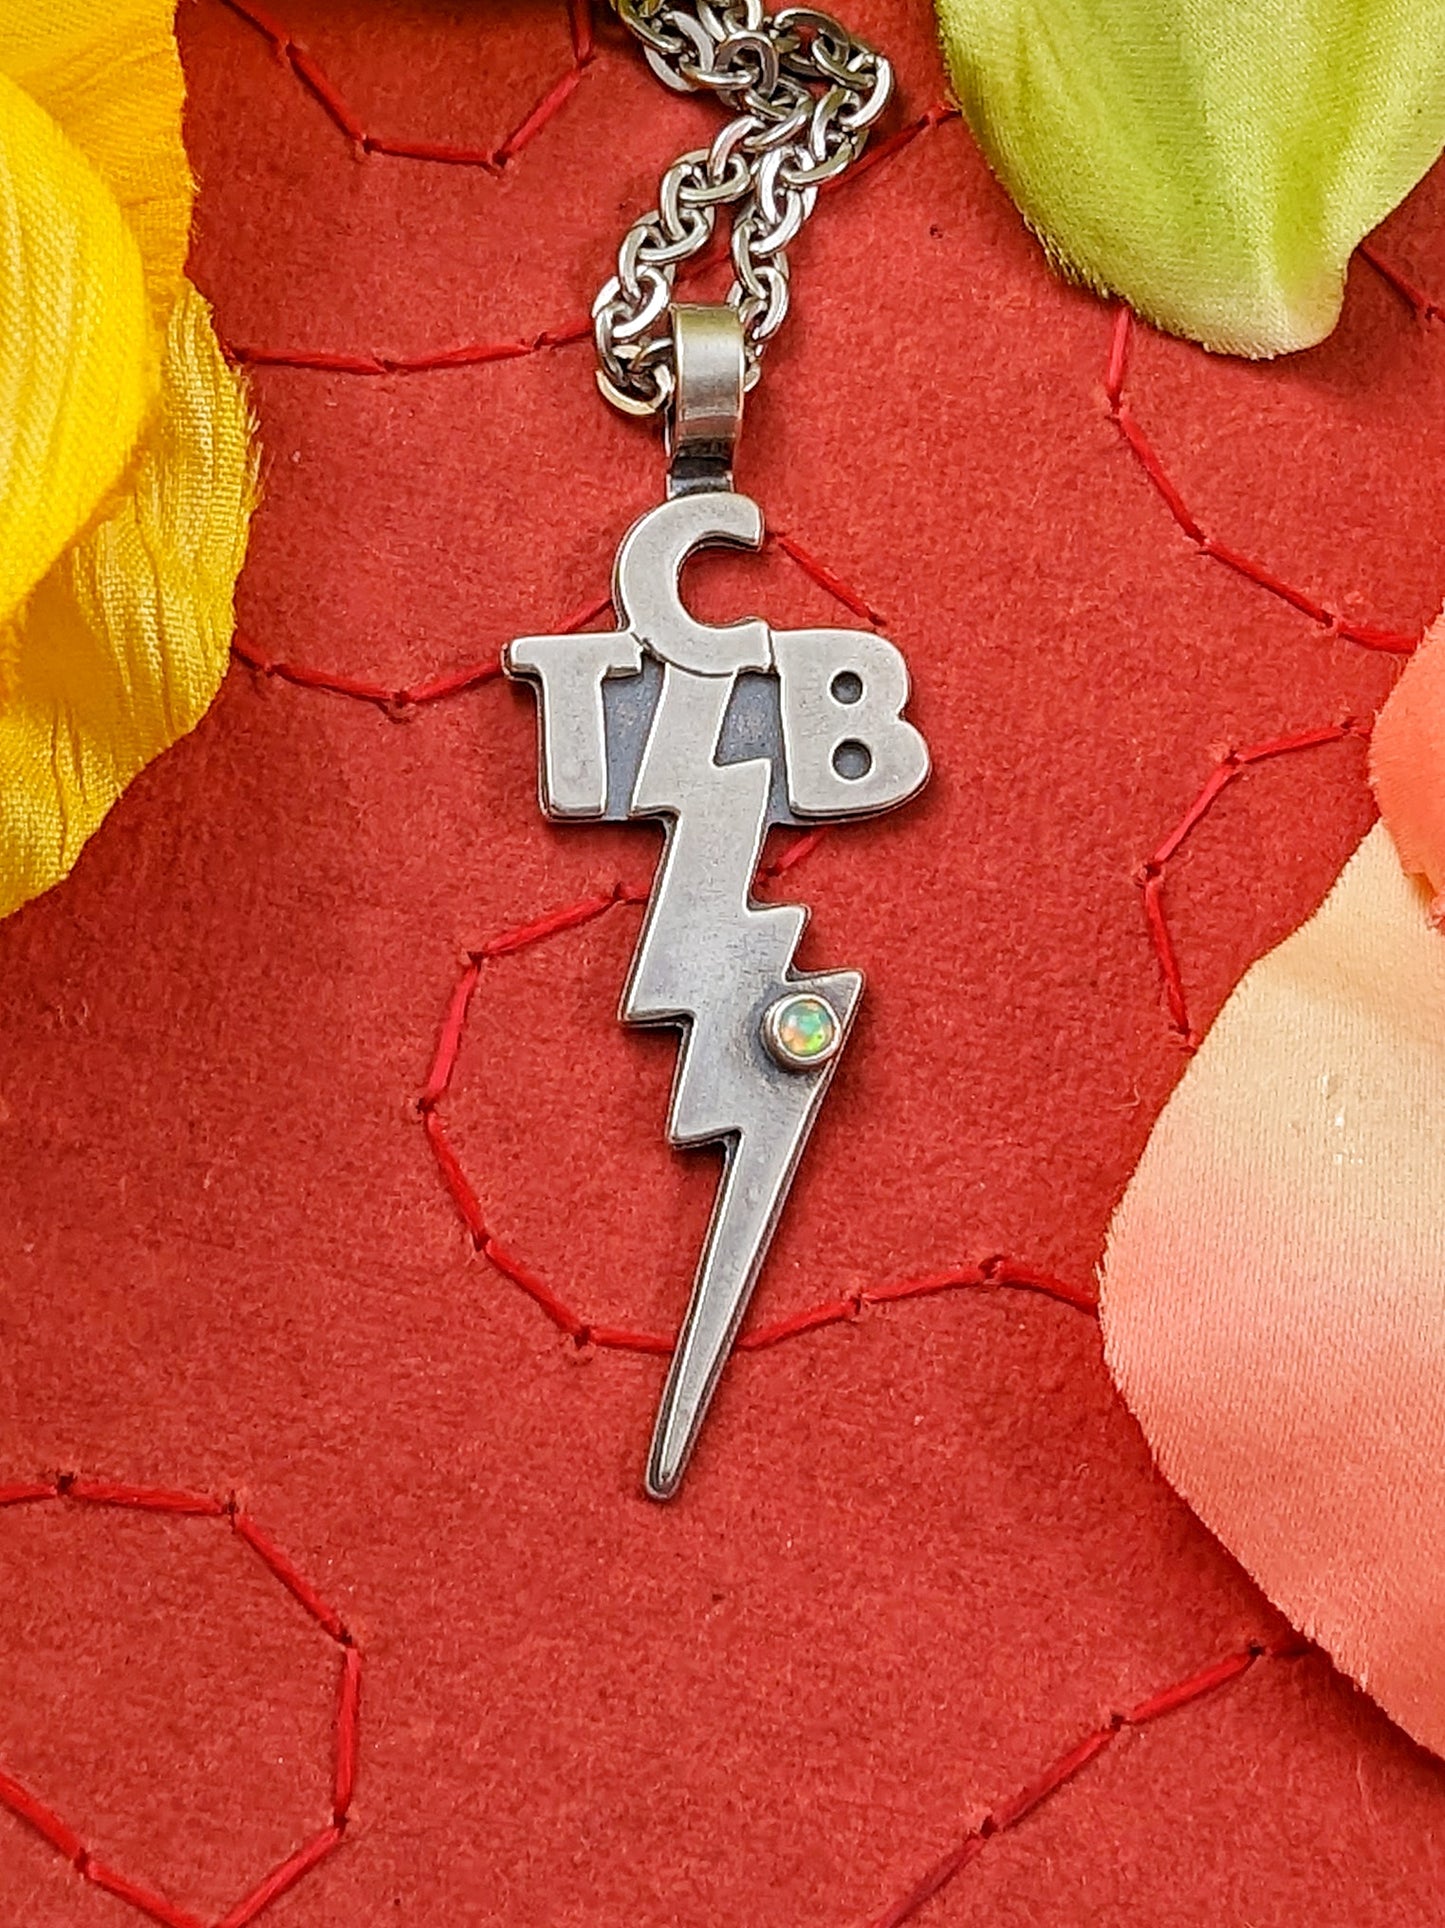 Taking Care of Business TCB necklace